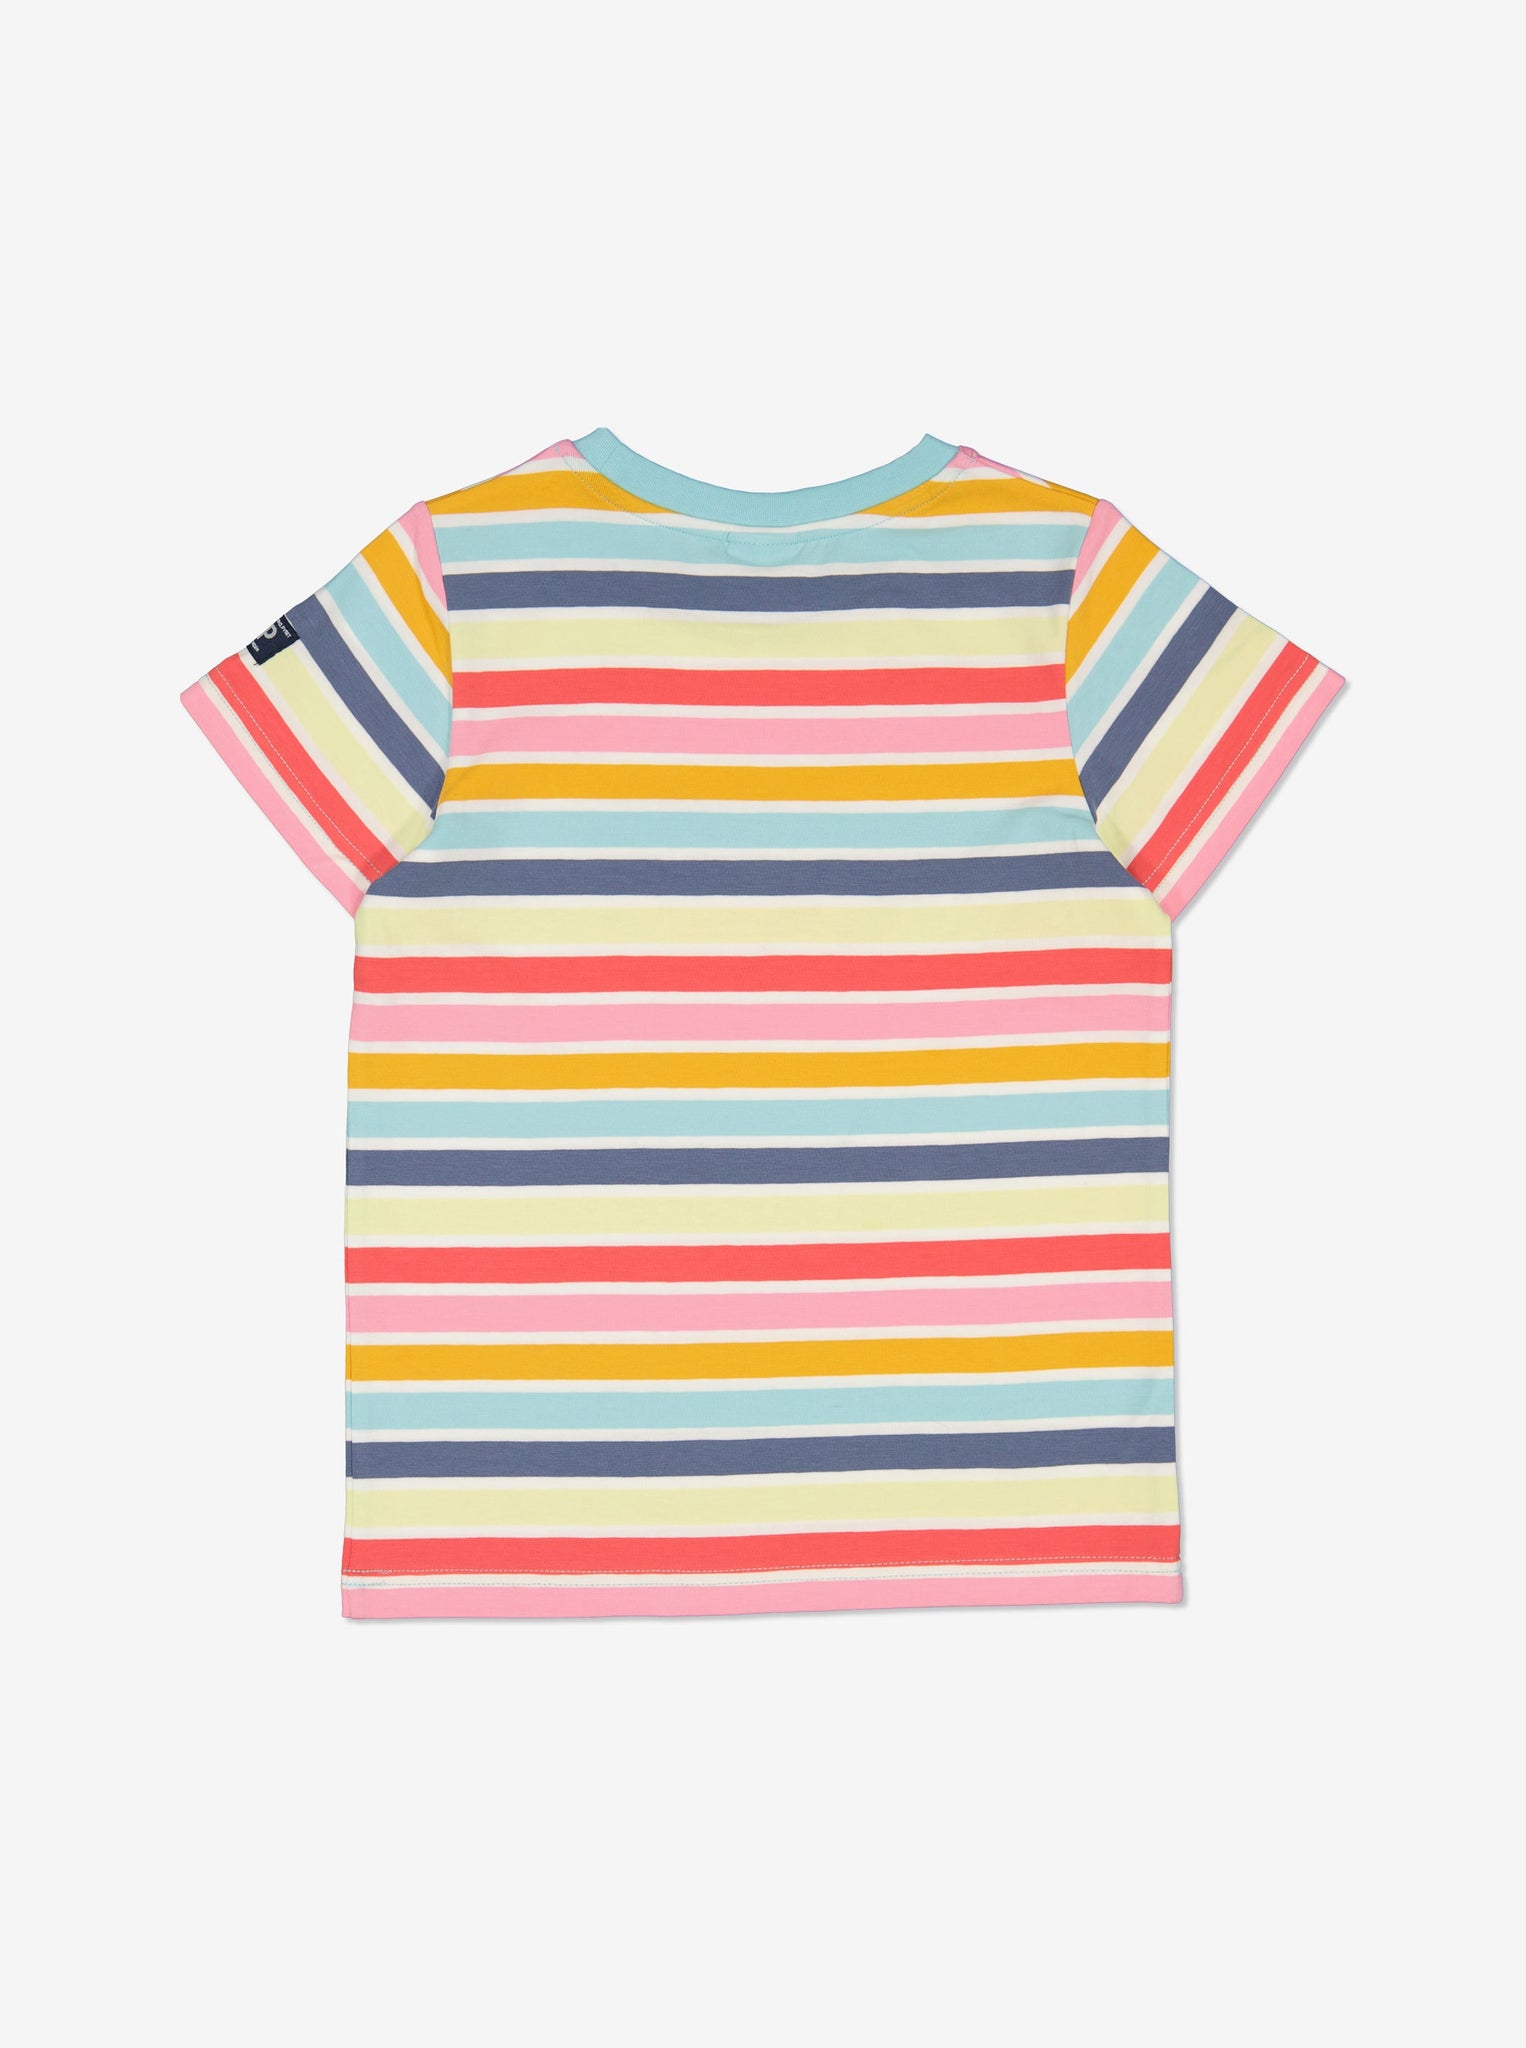 Crab Print Striped Kids T-Shirt from Polarn O. Pyret Kidswear. Made using sustainable sourced materials.